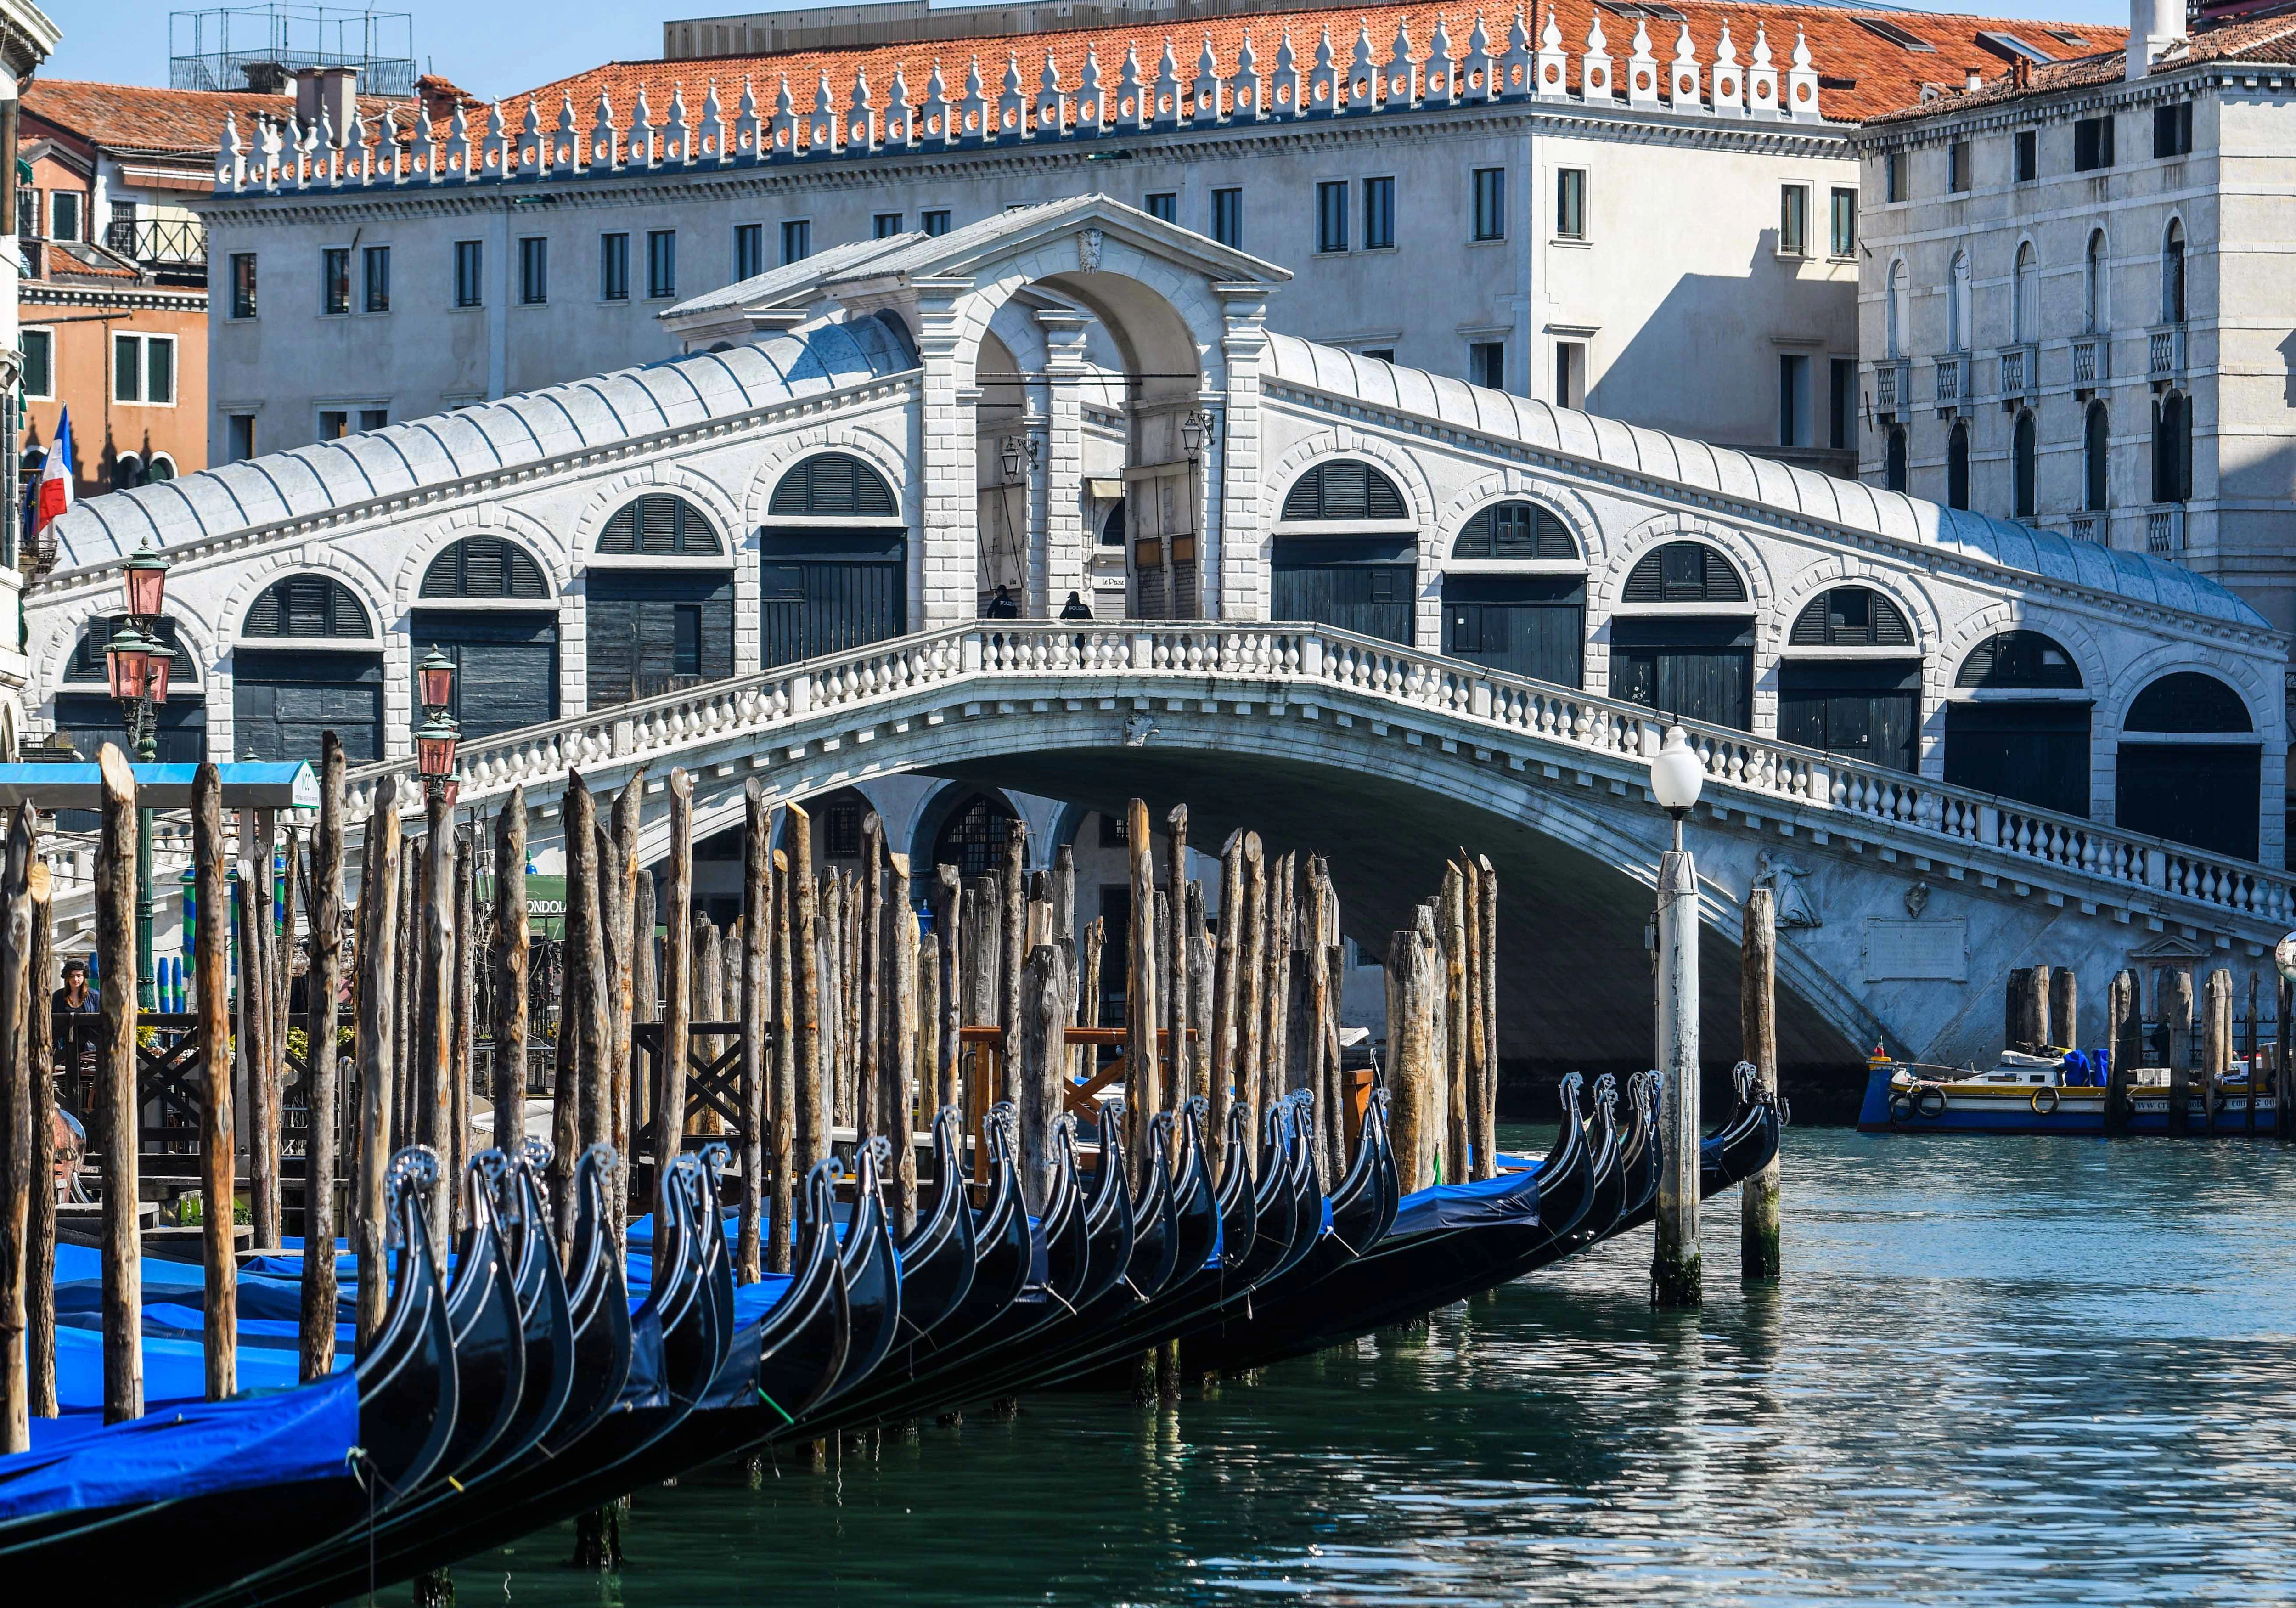 A view shows clear waters by gondolas in Venice's Grand Canal near the Rialto Bridge on March 18, 2020 as a result of the stoppage of motorboat traffic, following the country's lockdown within the new coronavirus crisis. (Photo by ANDREA PATTARO / AFP) (Photo by ANDREA PATTARO/AFP via Getty Images)/puente-rialto-venecia